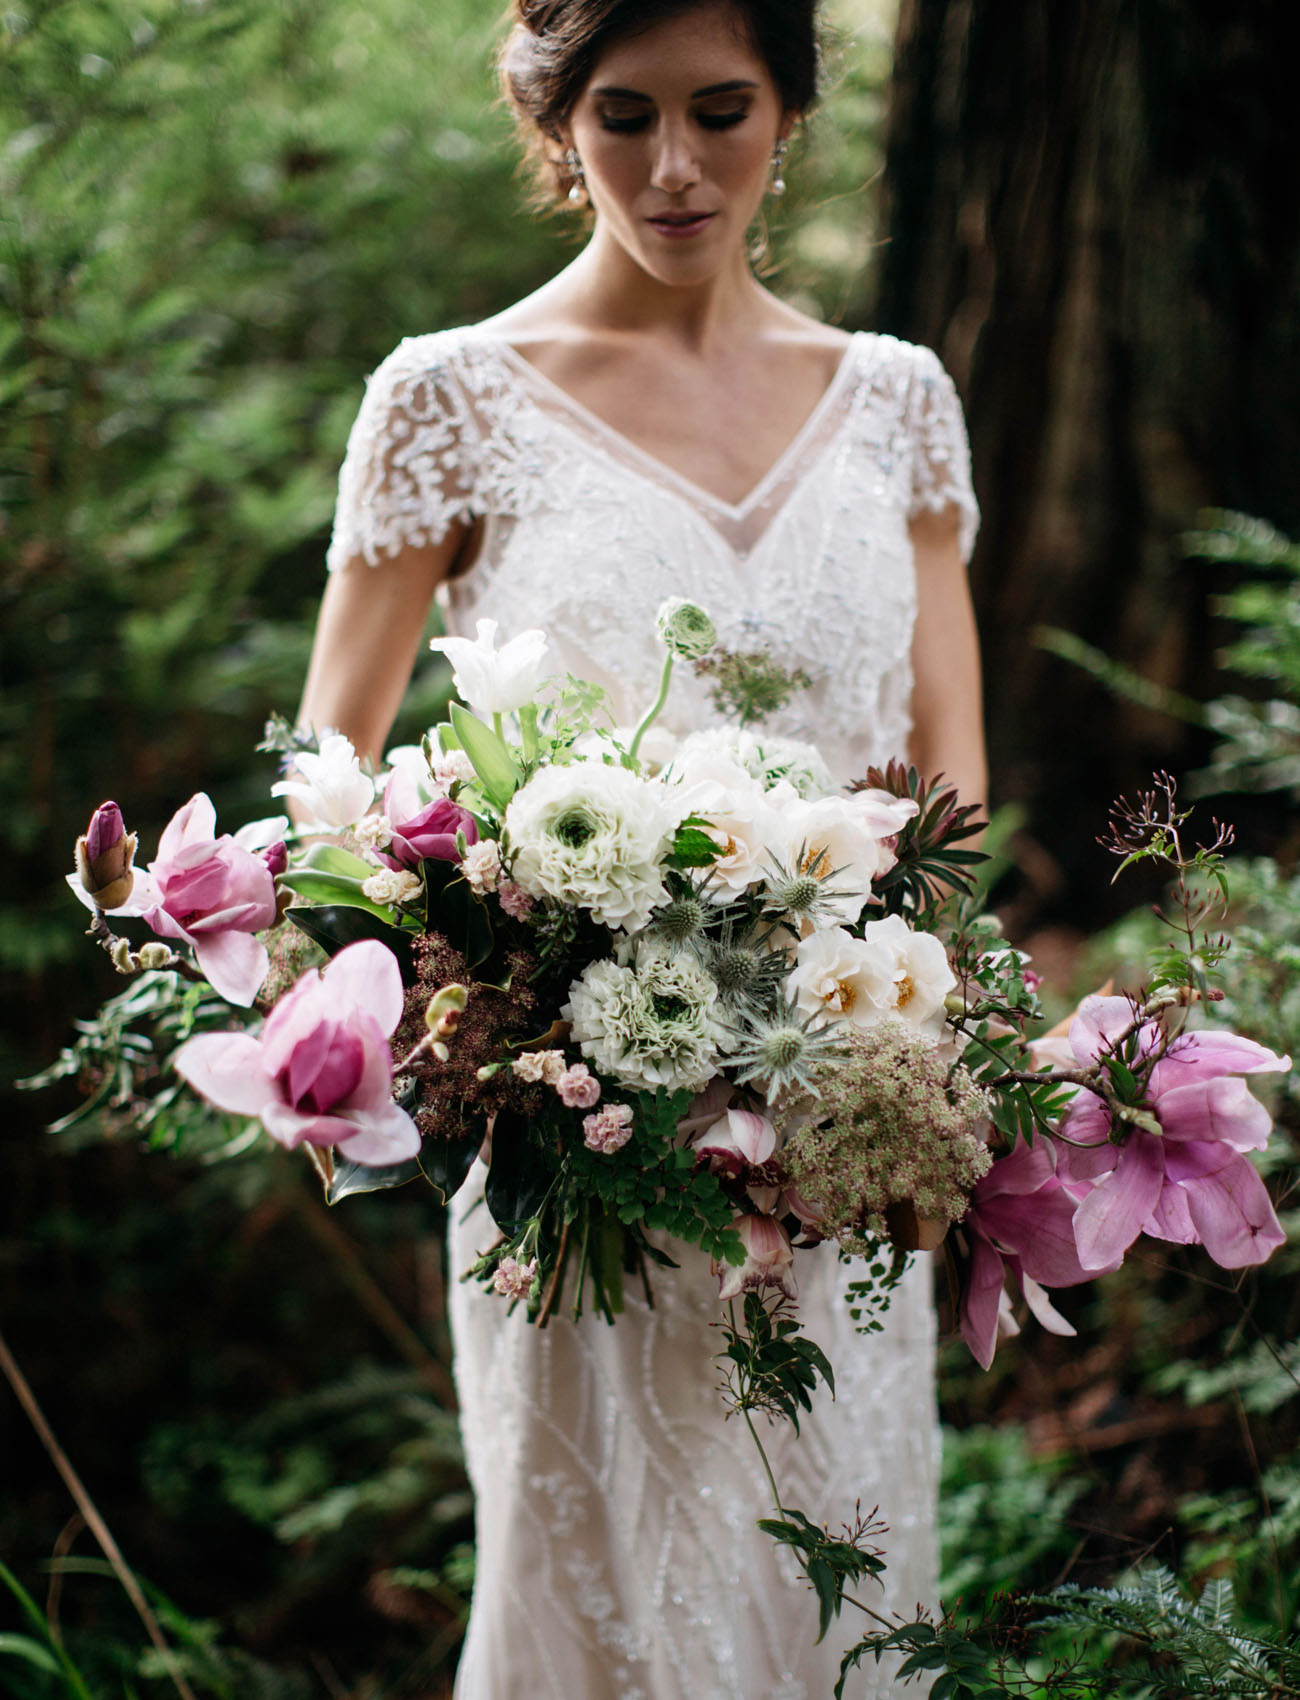 06 Her bouquet is messy as it’s a woodland wedding and all the details shouldn’t be polished